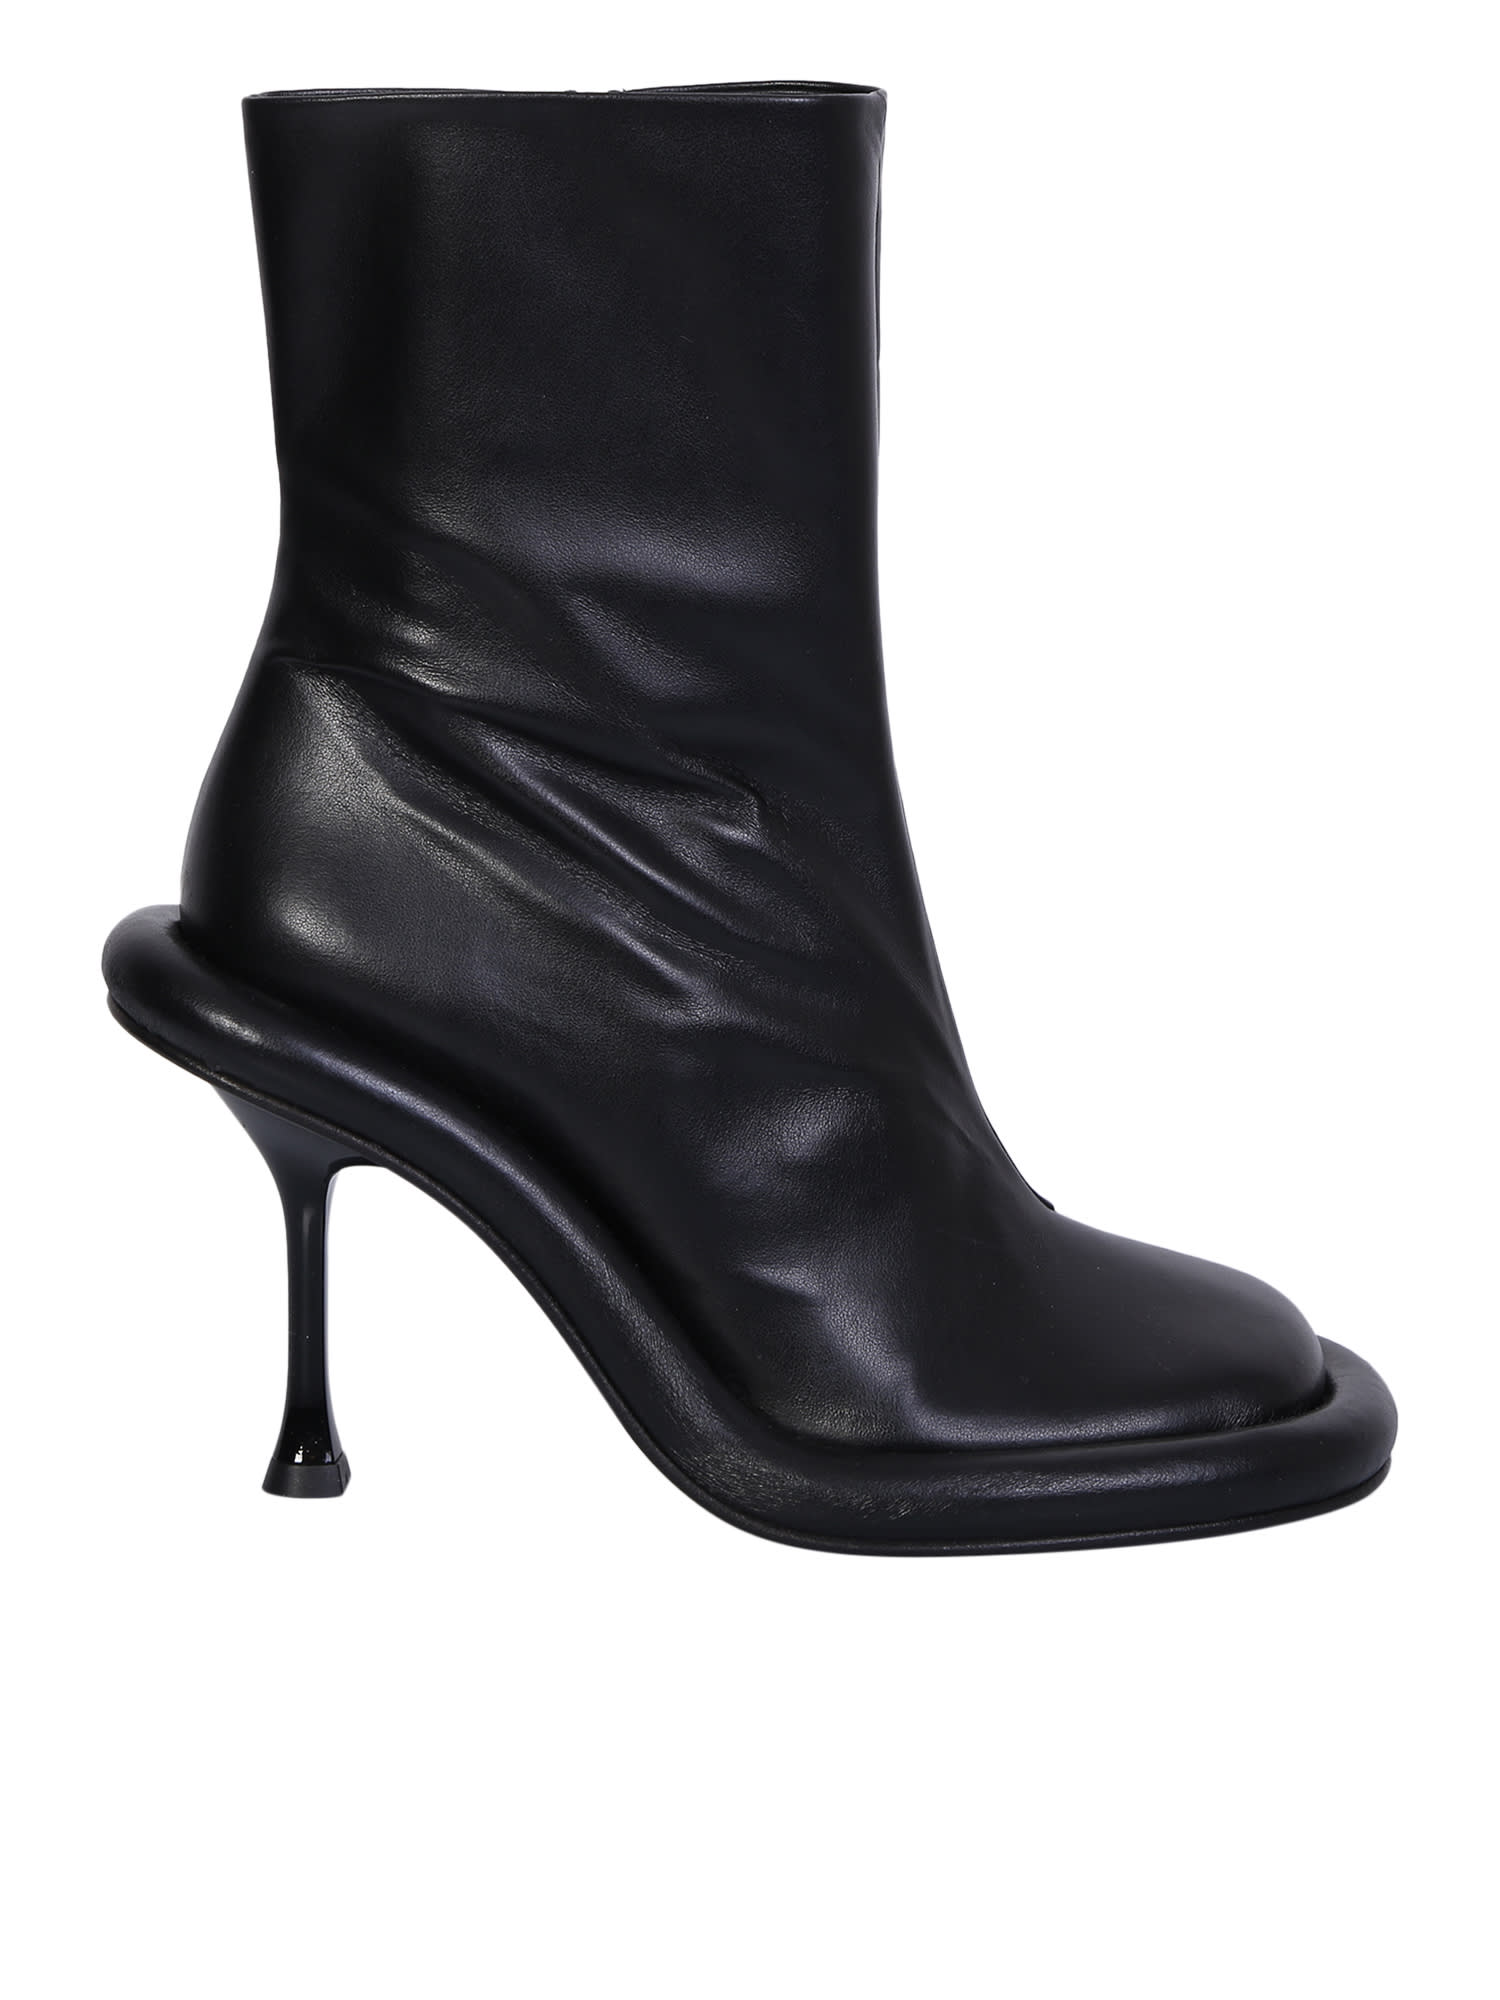 JW ANDERSON BUMPER-TUBE ANKLE BOOTS